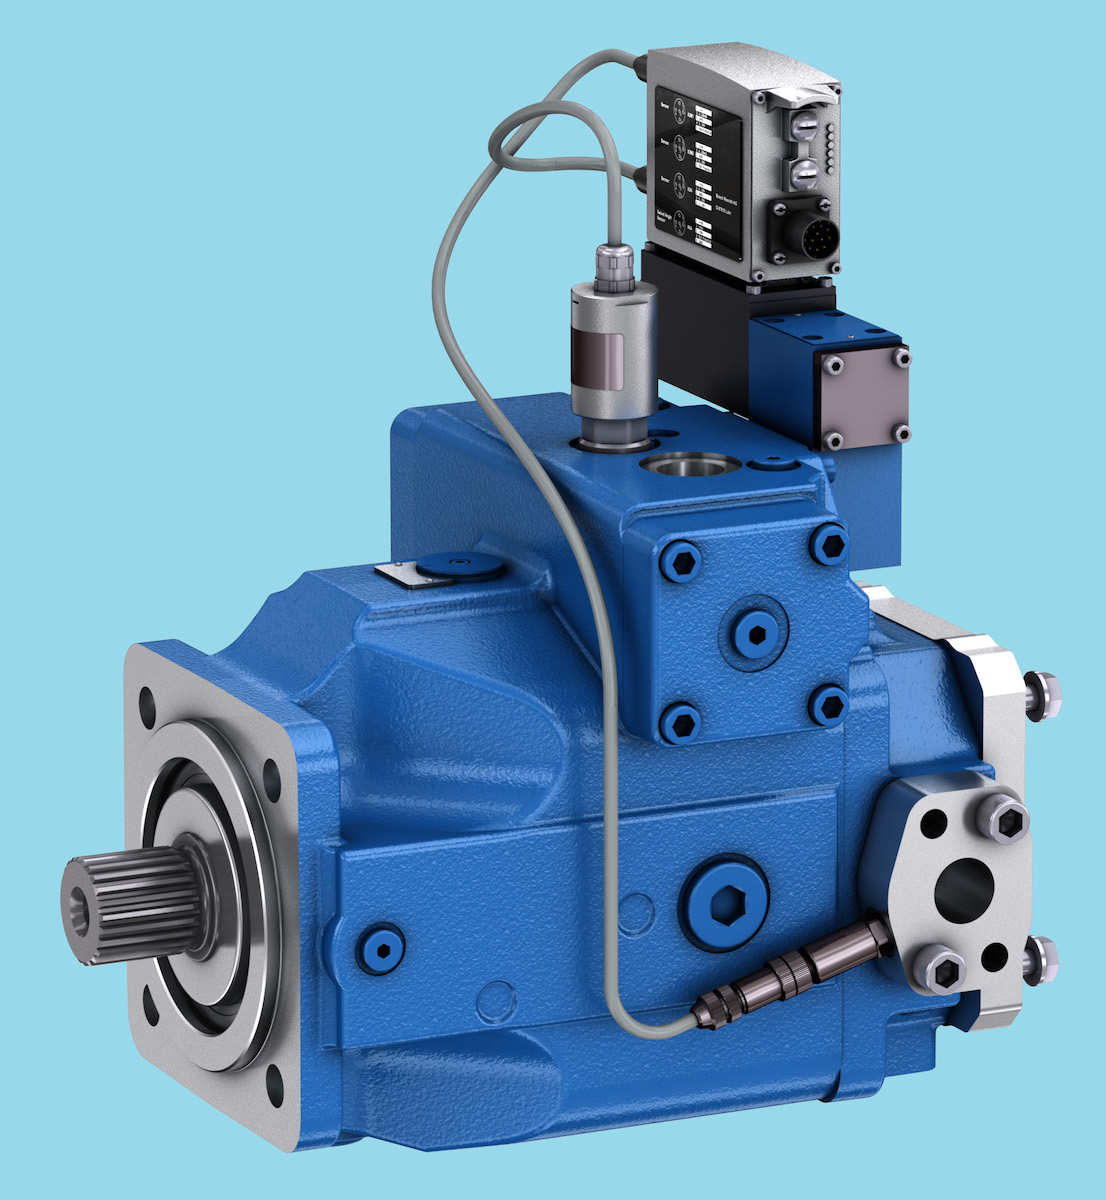 Figure 2. The Rexroth A4VSO HS5E pump includes a built-in digital controller and I4.0-ready sensors.